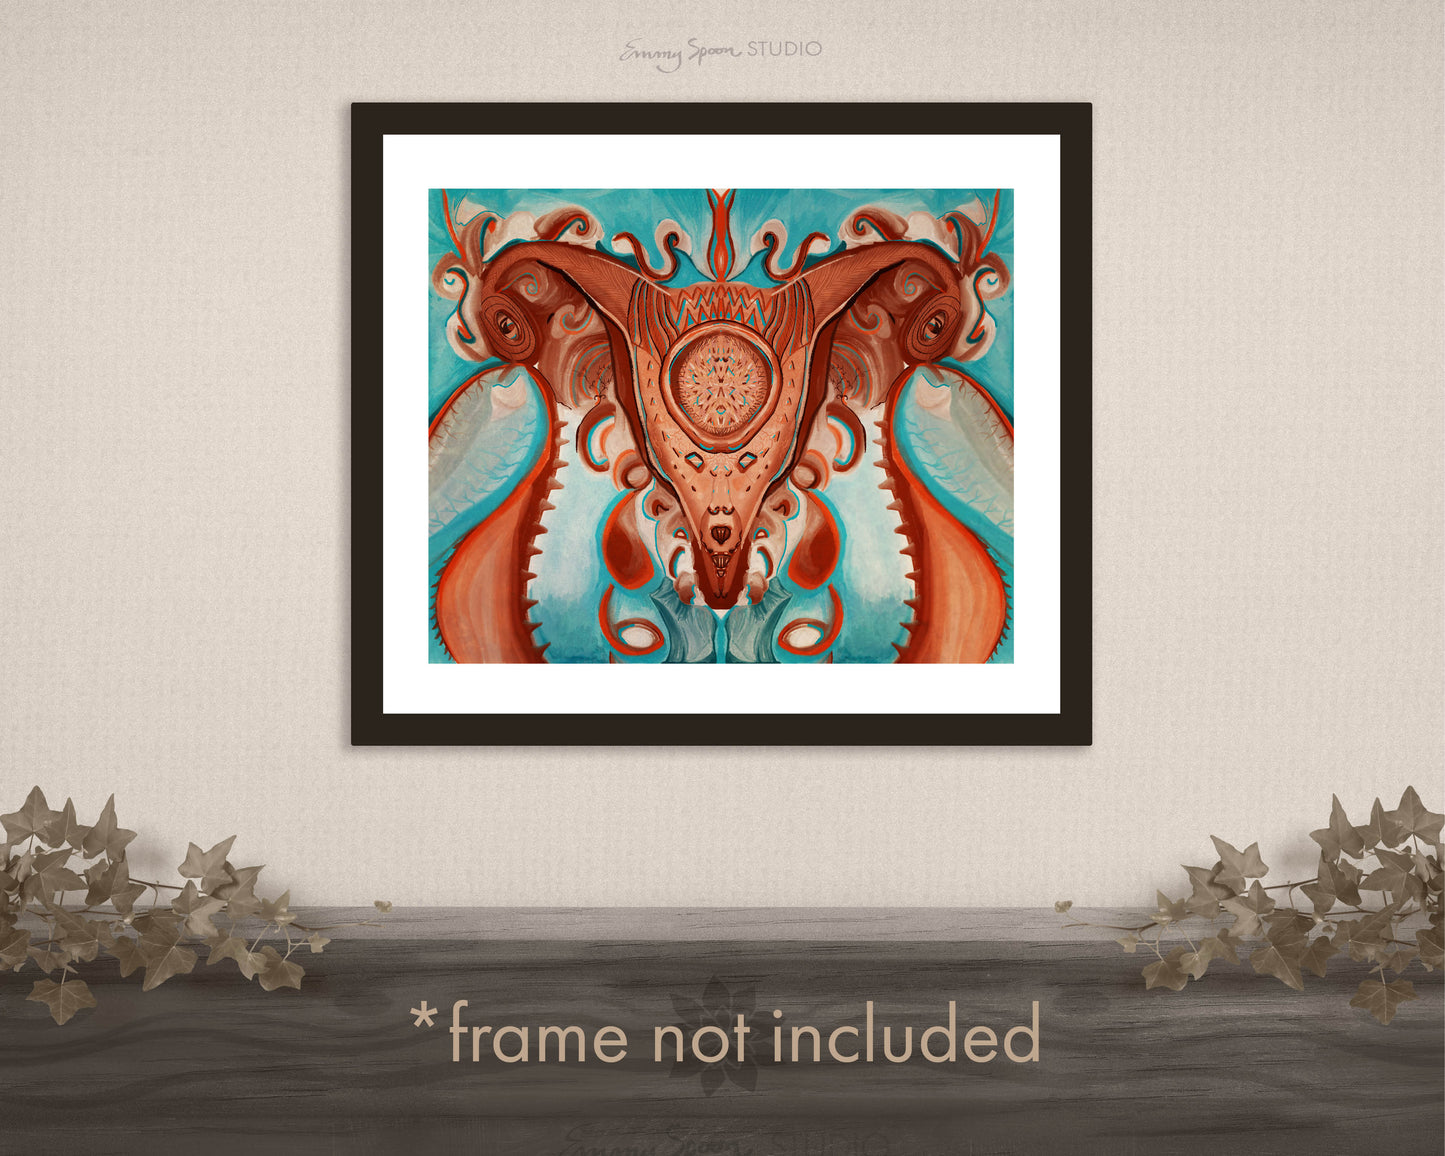 Womb (2022) by Emmy Spoon Metallic Art Print frame not included